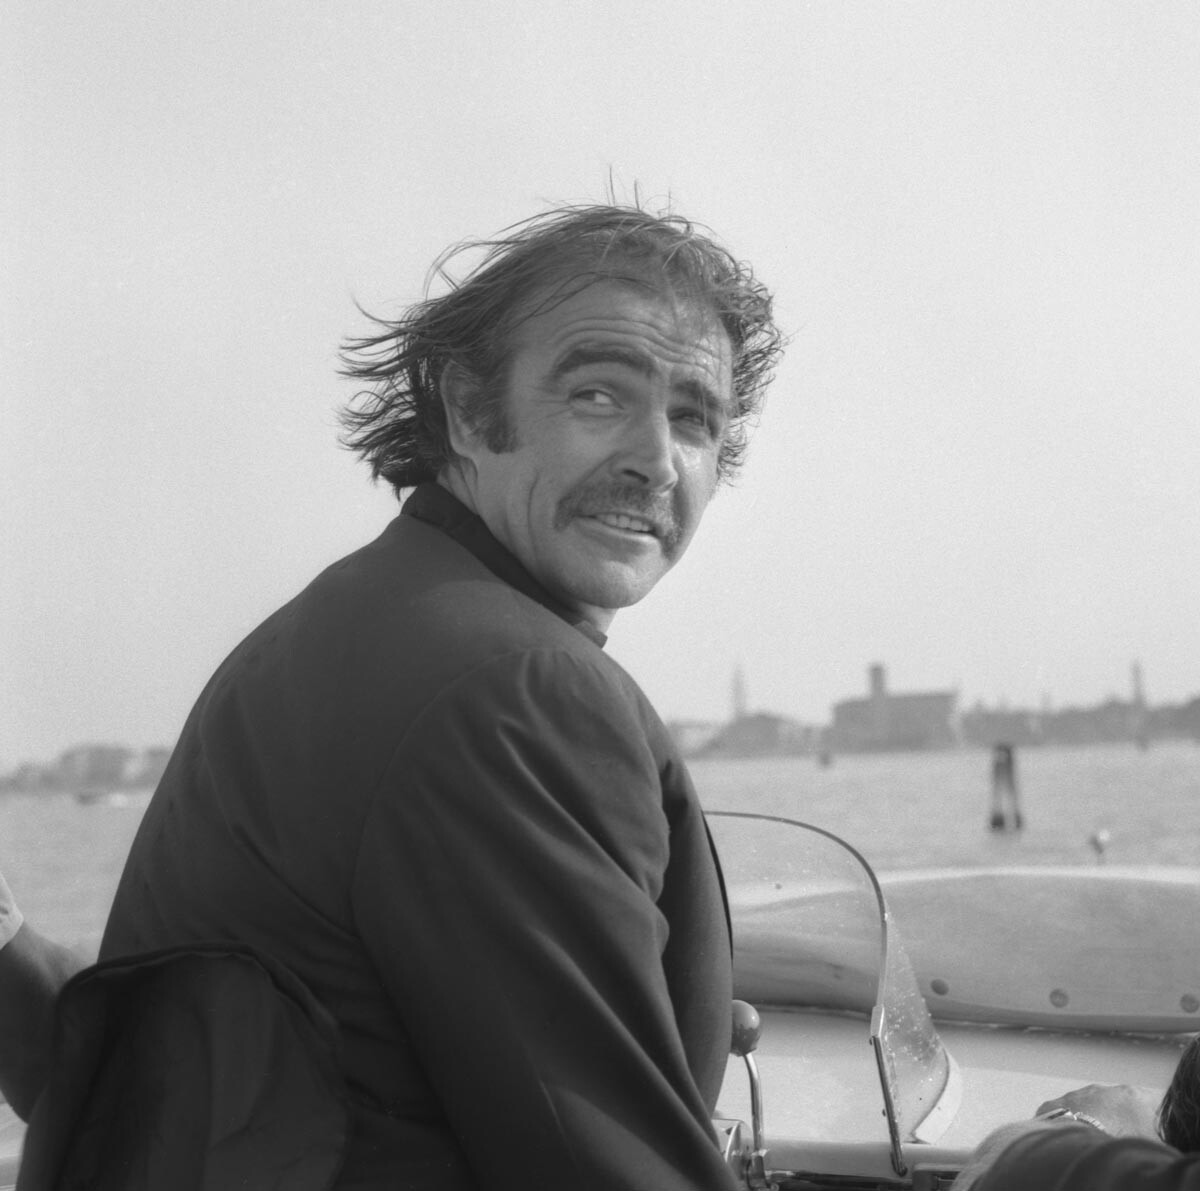 Sean Connery, pictured on a water taxi in Venice, 1970s.